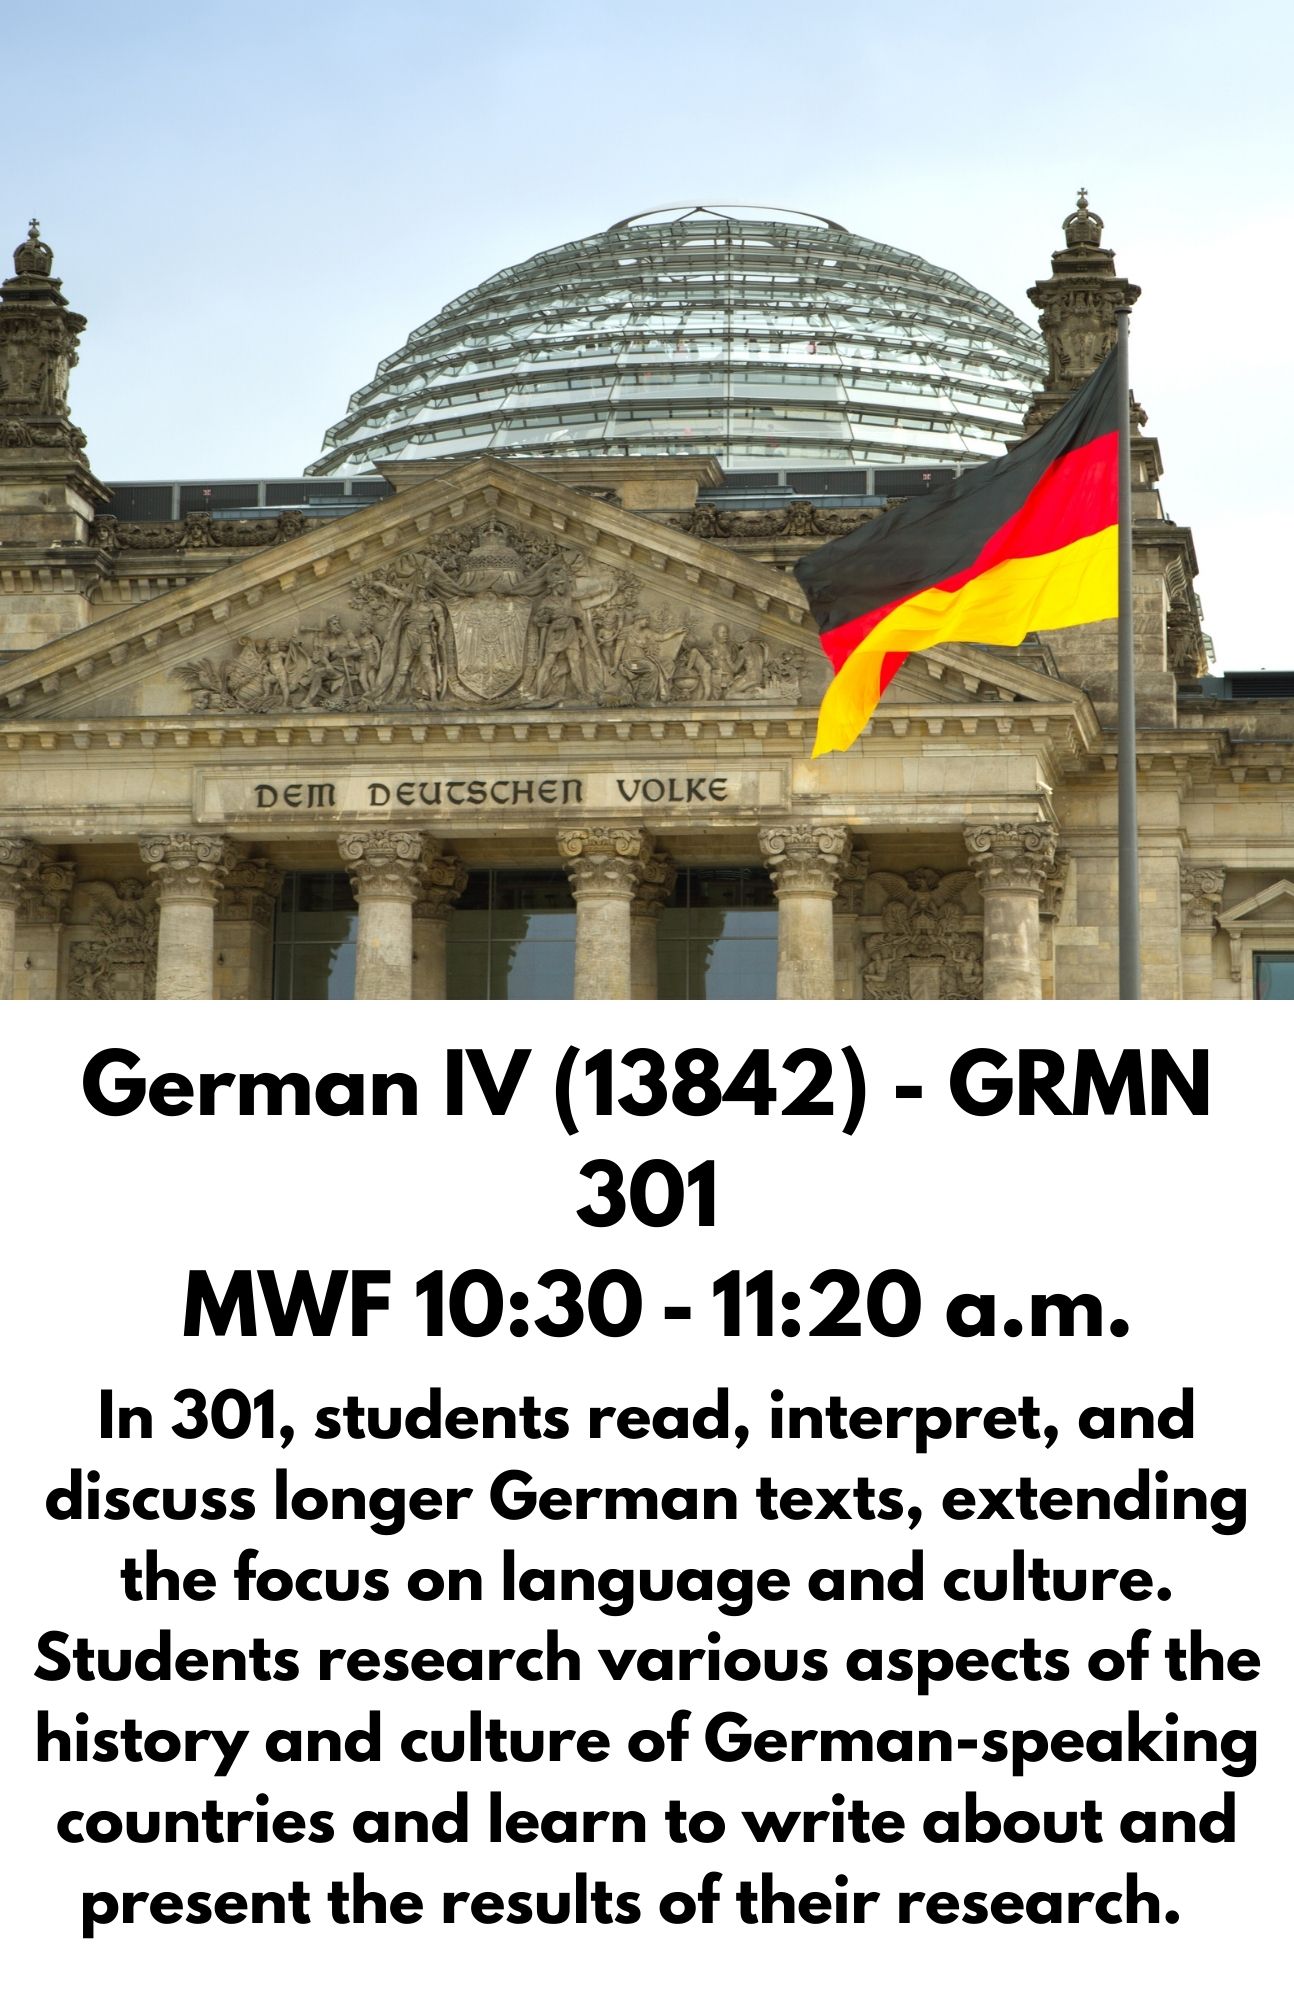 German IV (13842) - GRMN 301  MWF 10:30 - 11:20 a.m. In 301, students read, interpret, and discuss longer German texts, extending the focus on language and culture. Students research various aspects of the history and culture of German-speaking countries and learn to write about and present the results of their research.